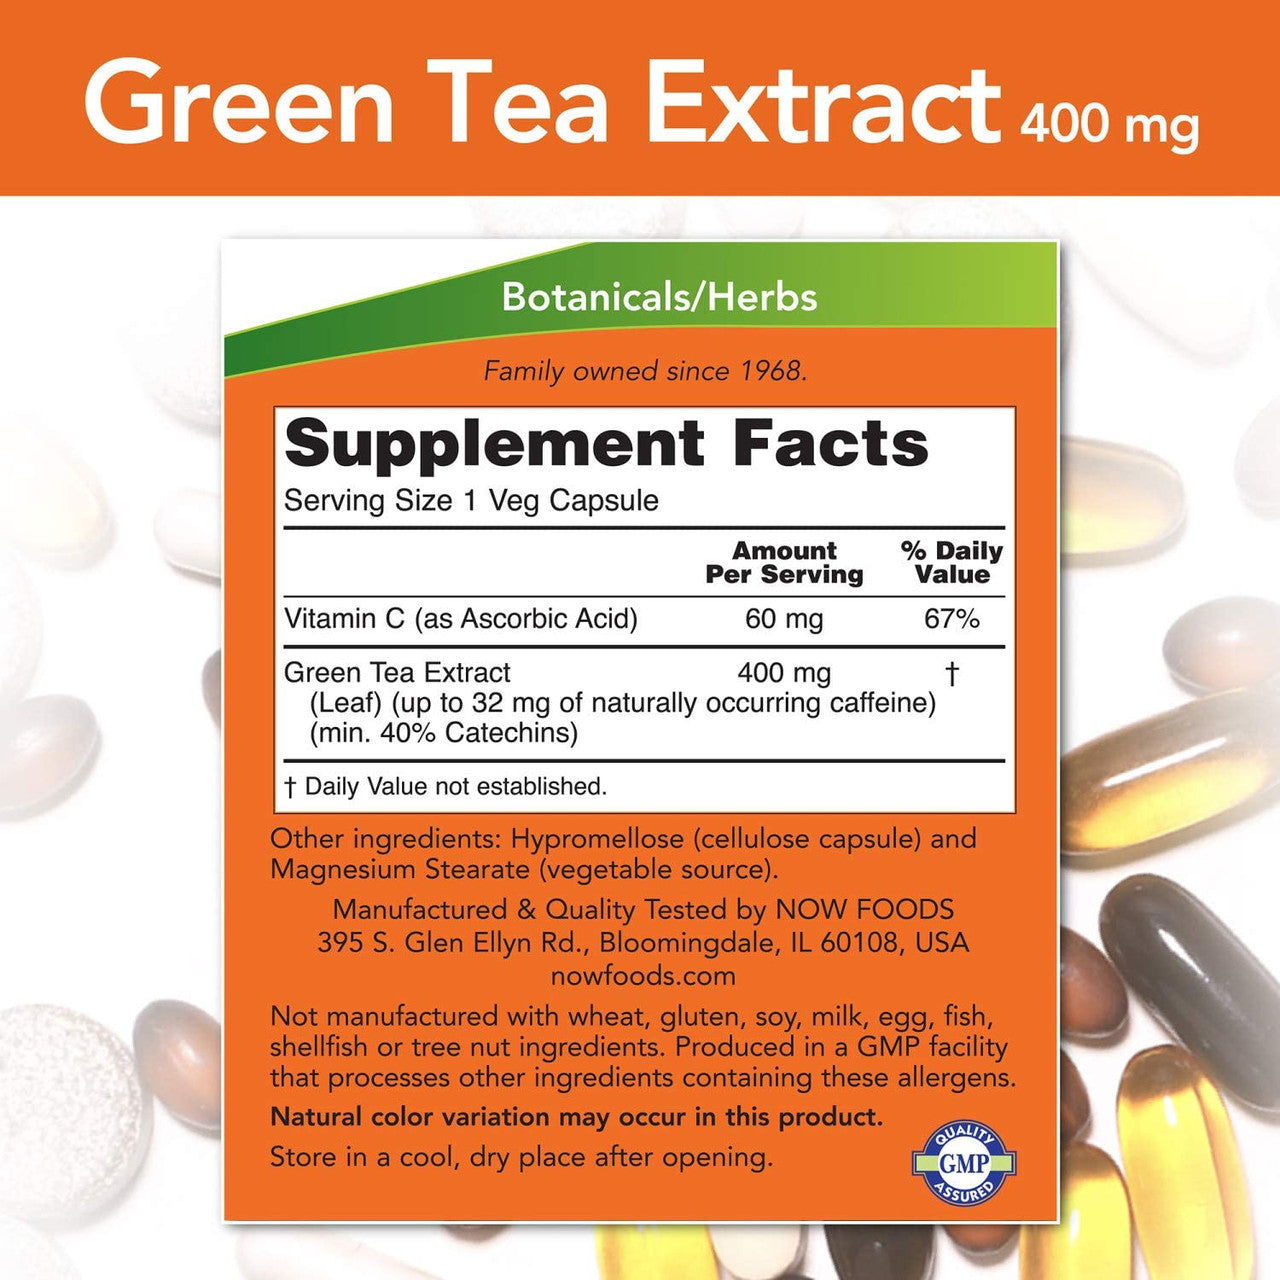 Now Green Tea Extract supplement facts